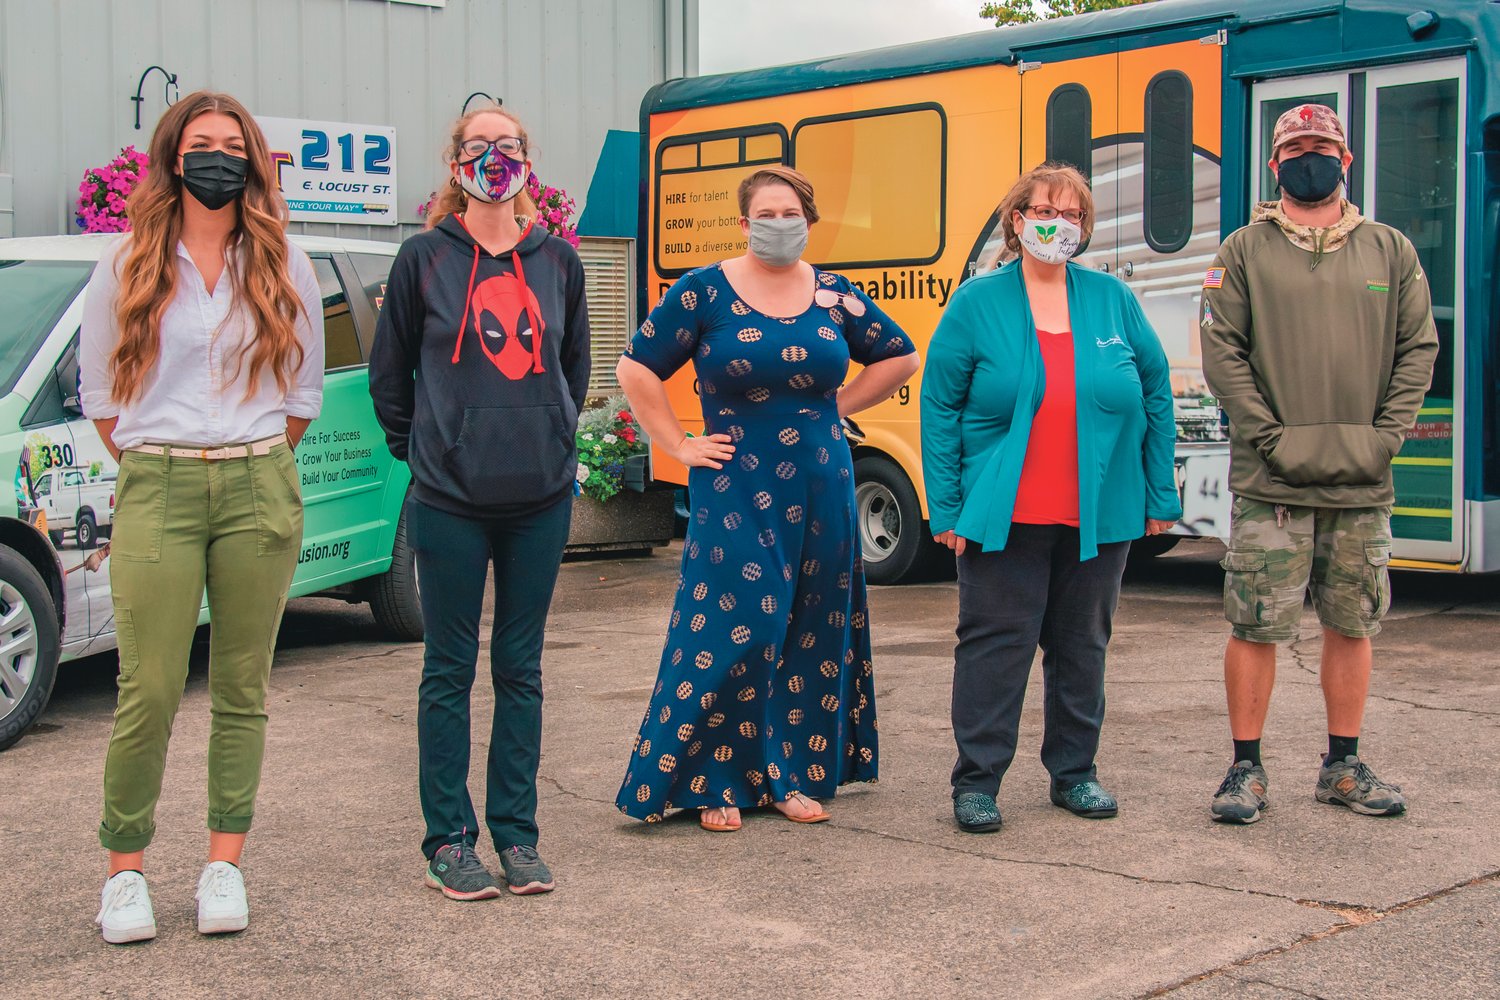 From left, Nicole Miller, Hannah Byrd, Brittany Voie, President of the Lewis County Autism Coalition Lisa Davis and Adrian Rone pose for a photo in front of newly wrapped Twin Transit rides Thursday in Centralia during a Cultivating Inclusion job hiring campaign.